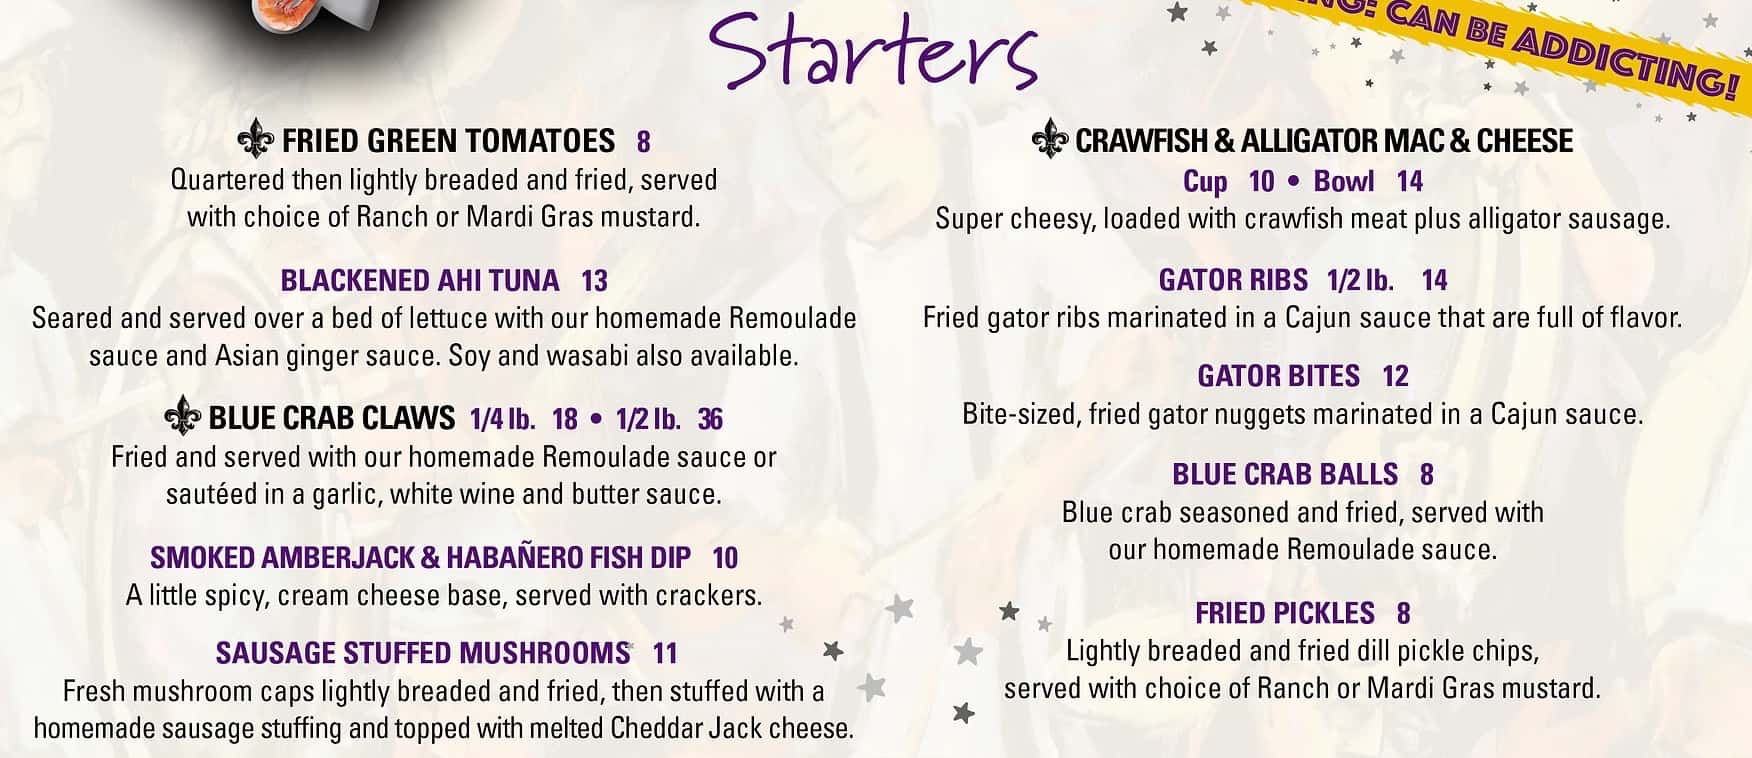 Seafood Seller and Cafe Starters Menu